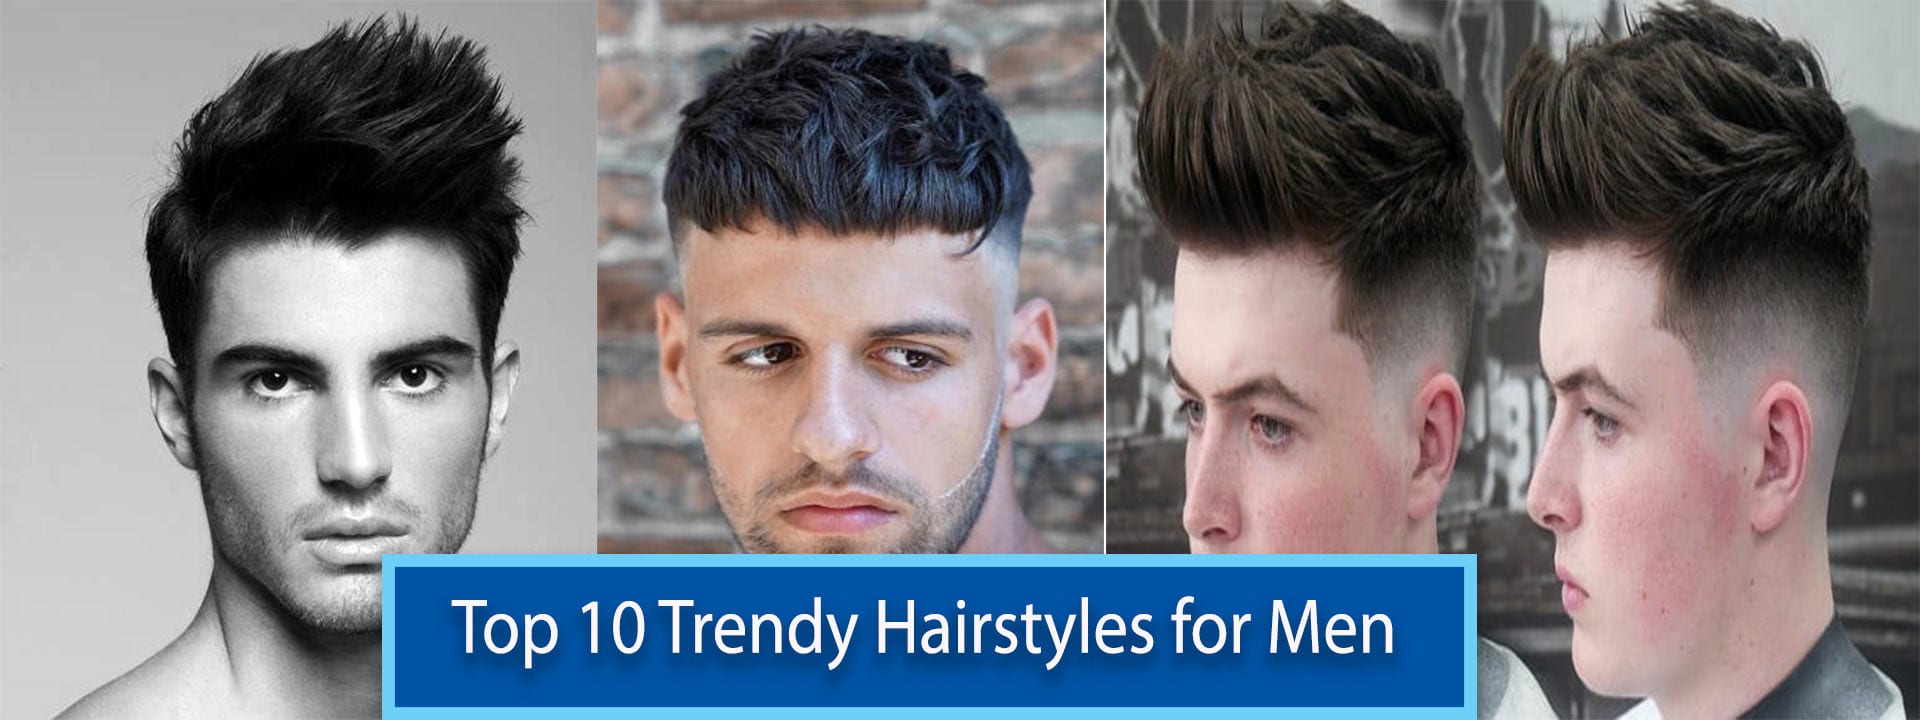 Top 10 Hairstyles For Men 2019 Find Health Tips